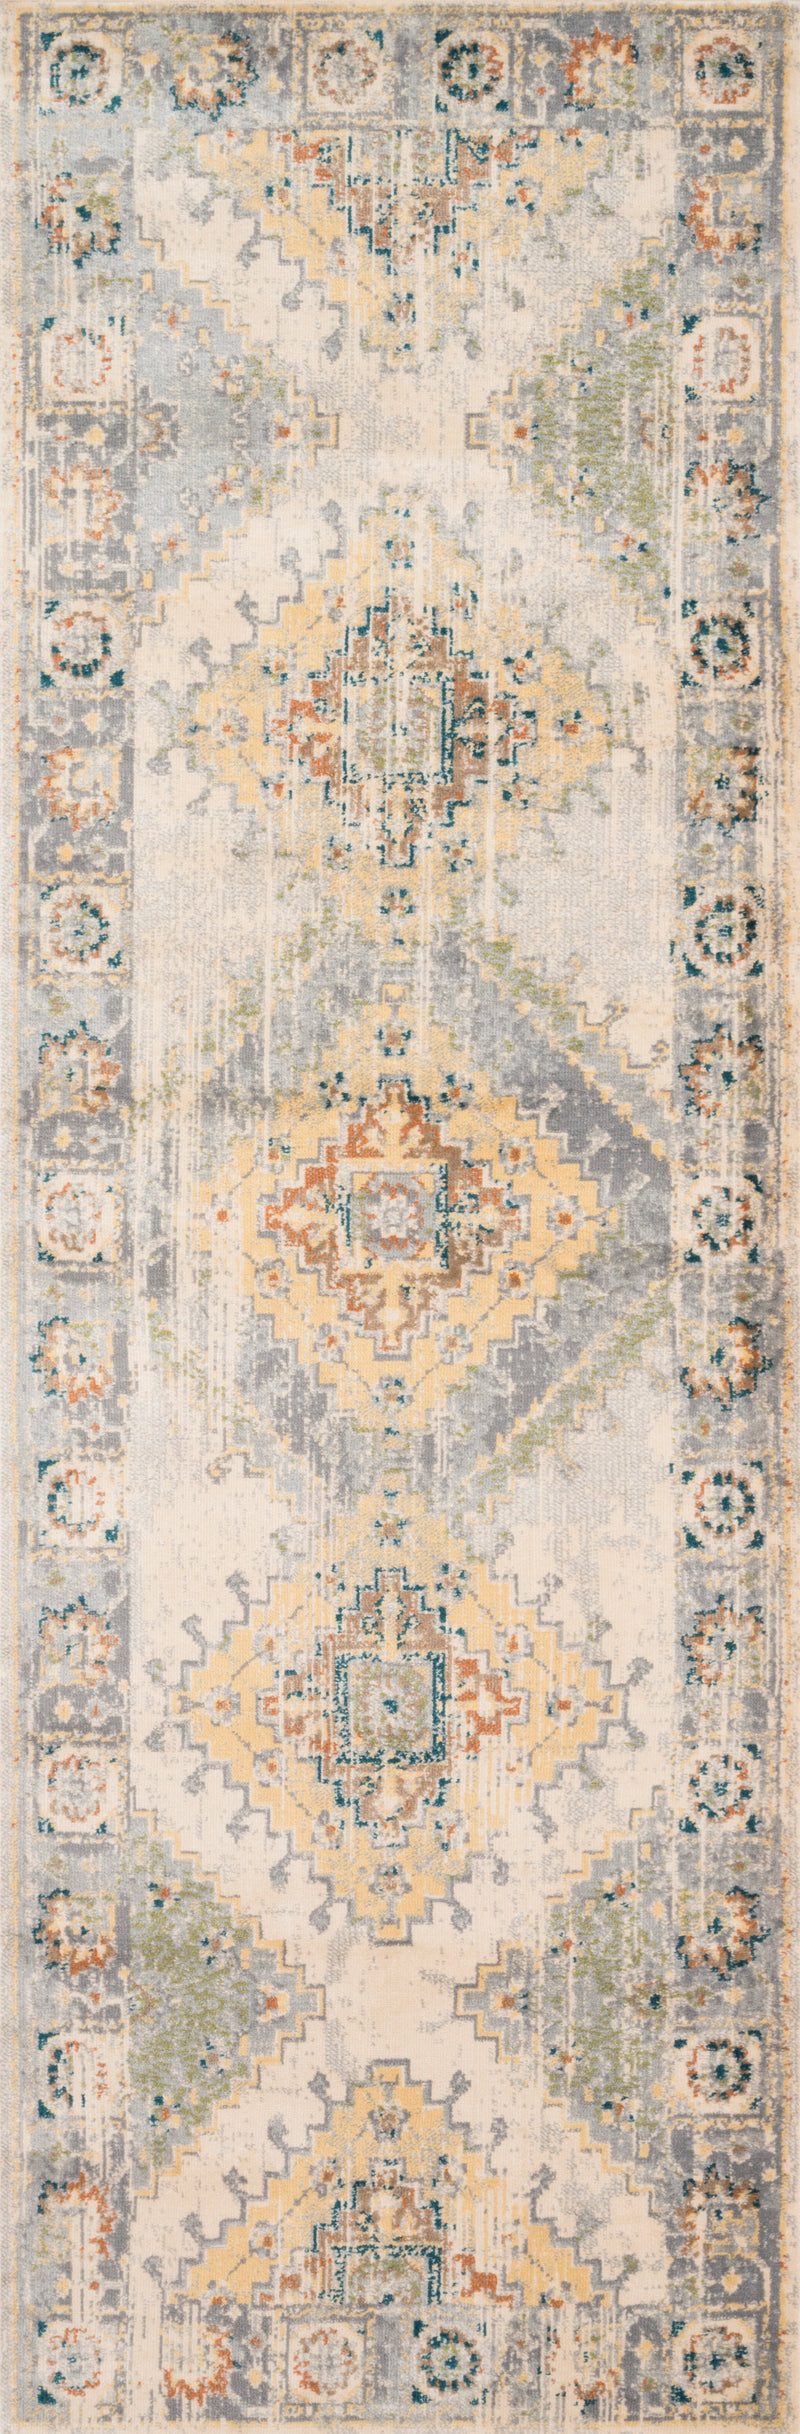 ISADORA Collection Rug  in  OATMEAL / SILVER Beige Accent Power-Loomed Polypropylene